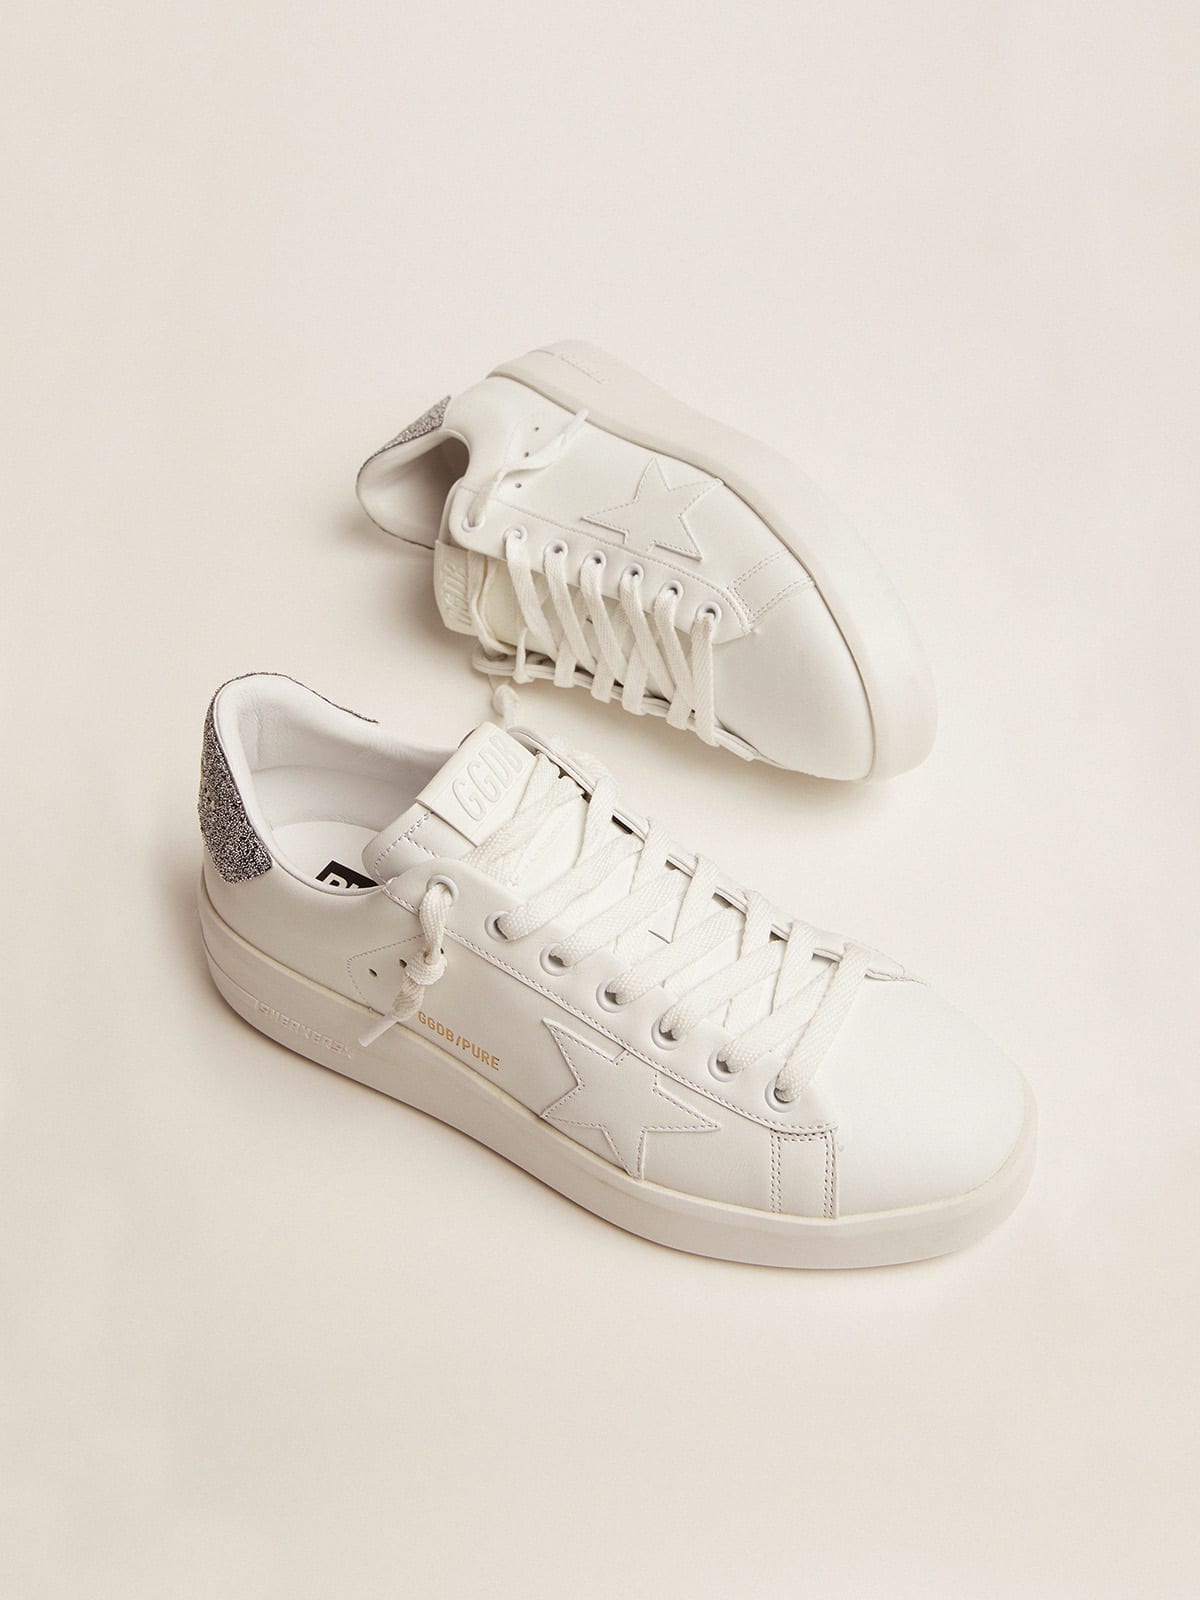 Golden Goose - Purestar sneakers in white leather with silver Swarovski crystal heel tab in 